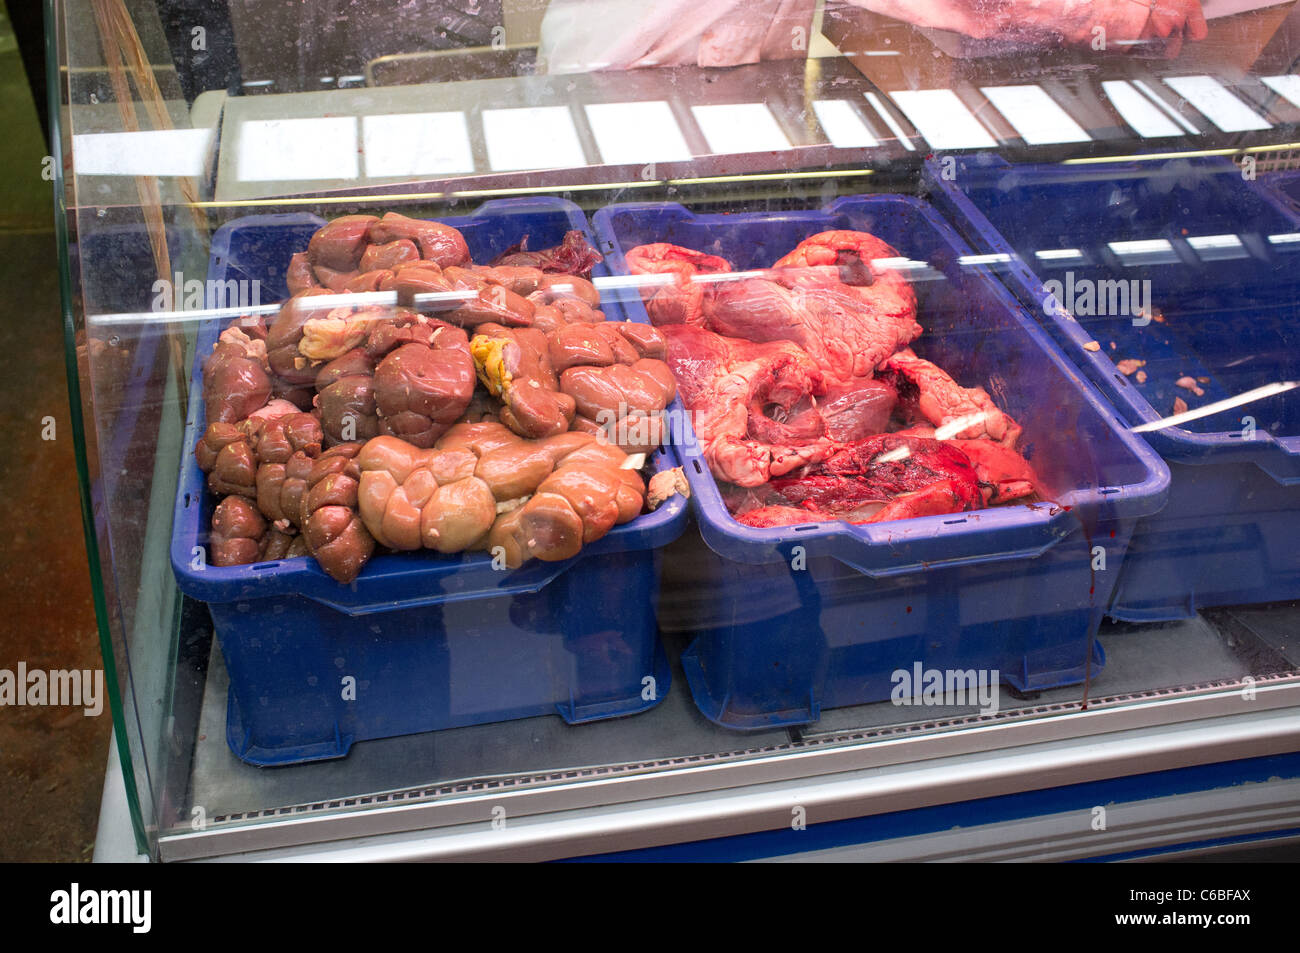 Offal in containers at Smithfields Meat Market, City of London, UK Stock Photo